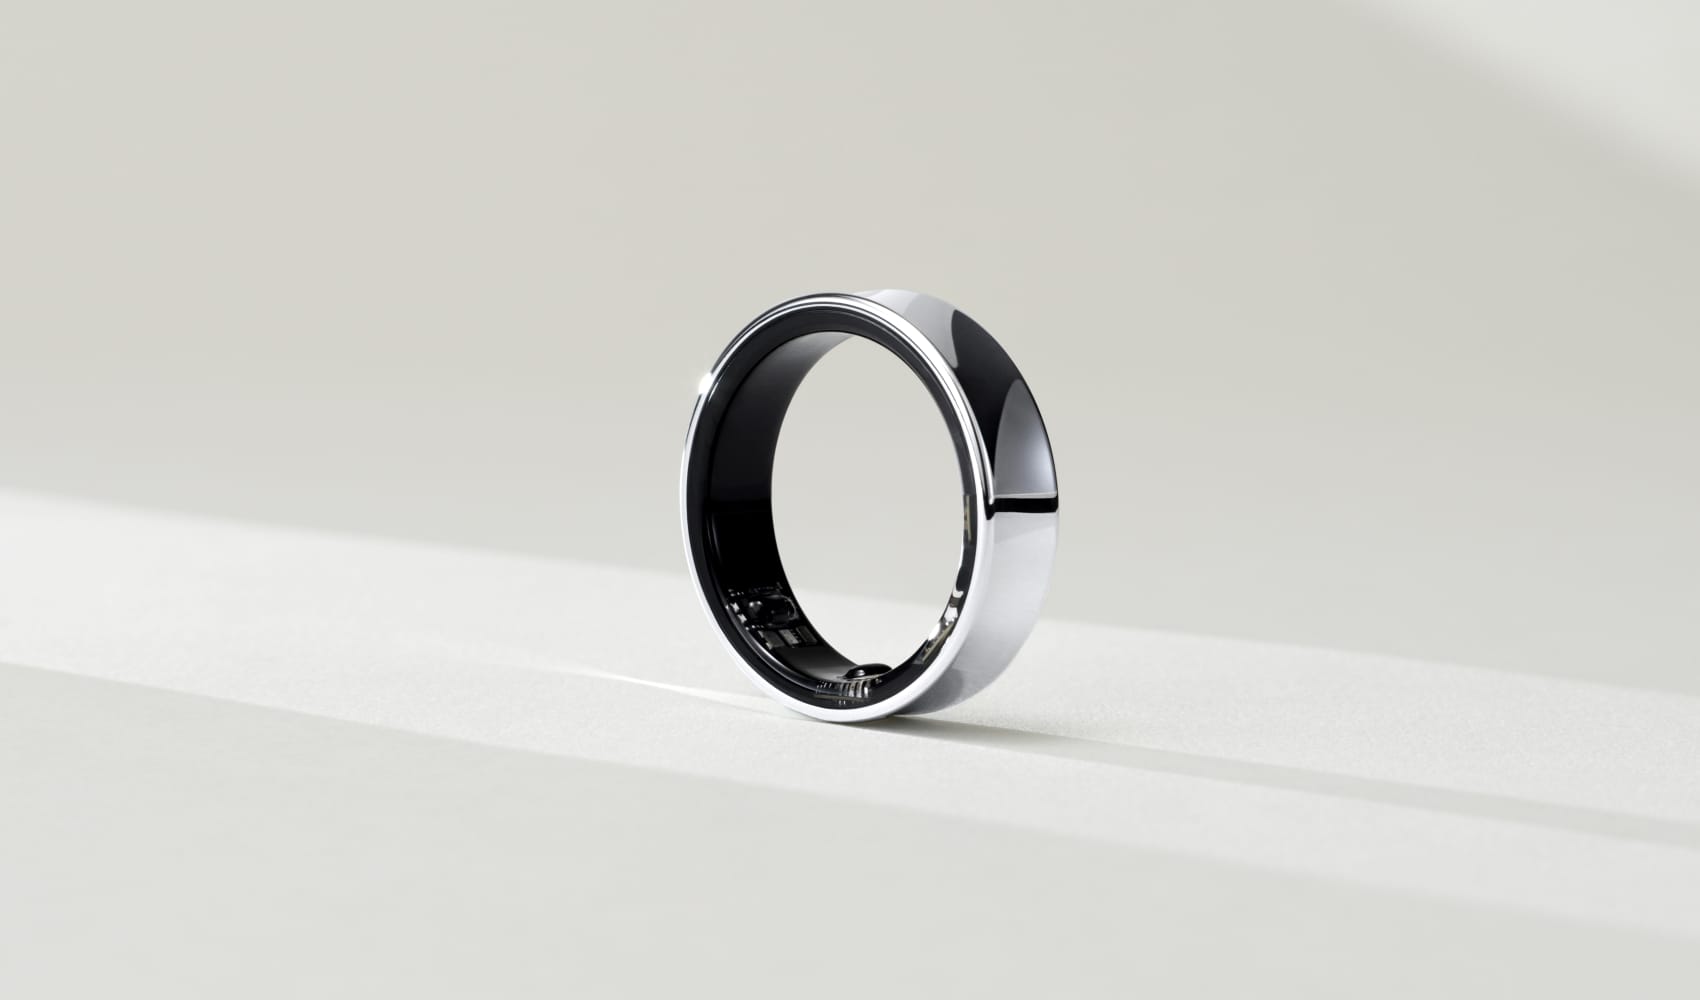 Samsung debuts a ‘smart ring' with health-tracking features — its
first foray into the product category